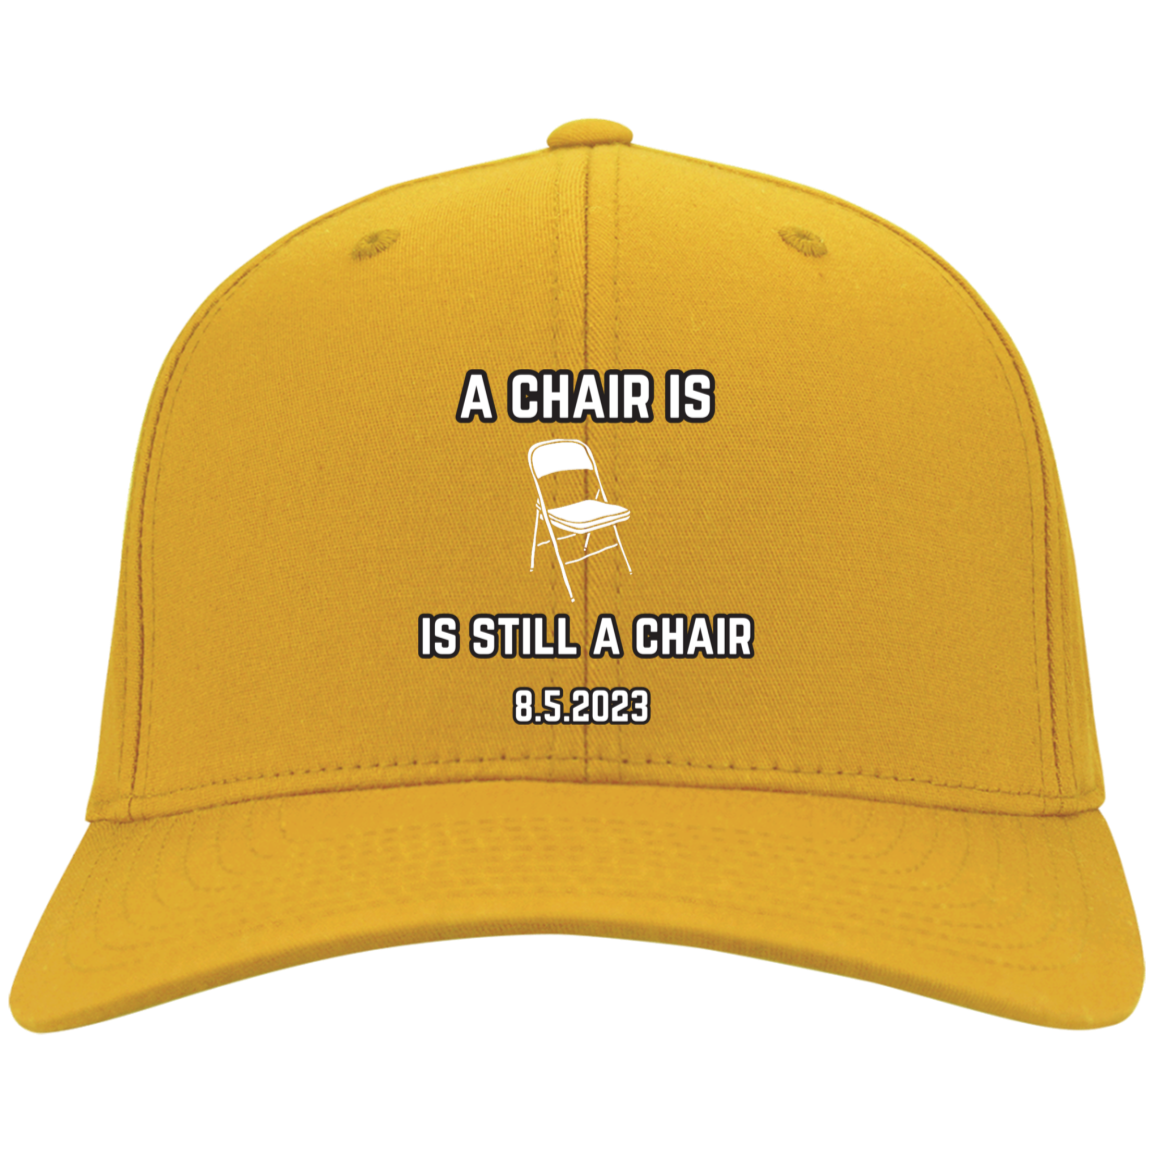 A Chair Is Still A Chair Embroidered Twill Cap